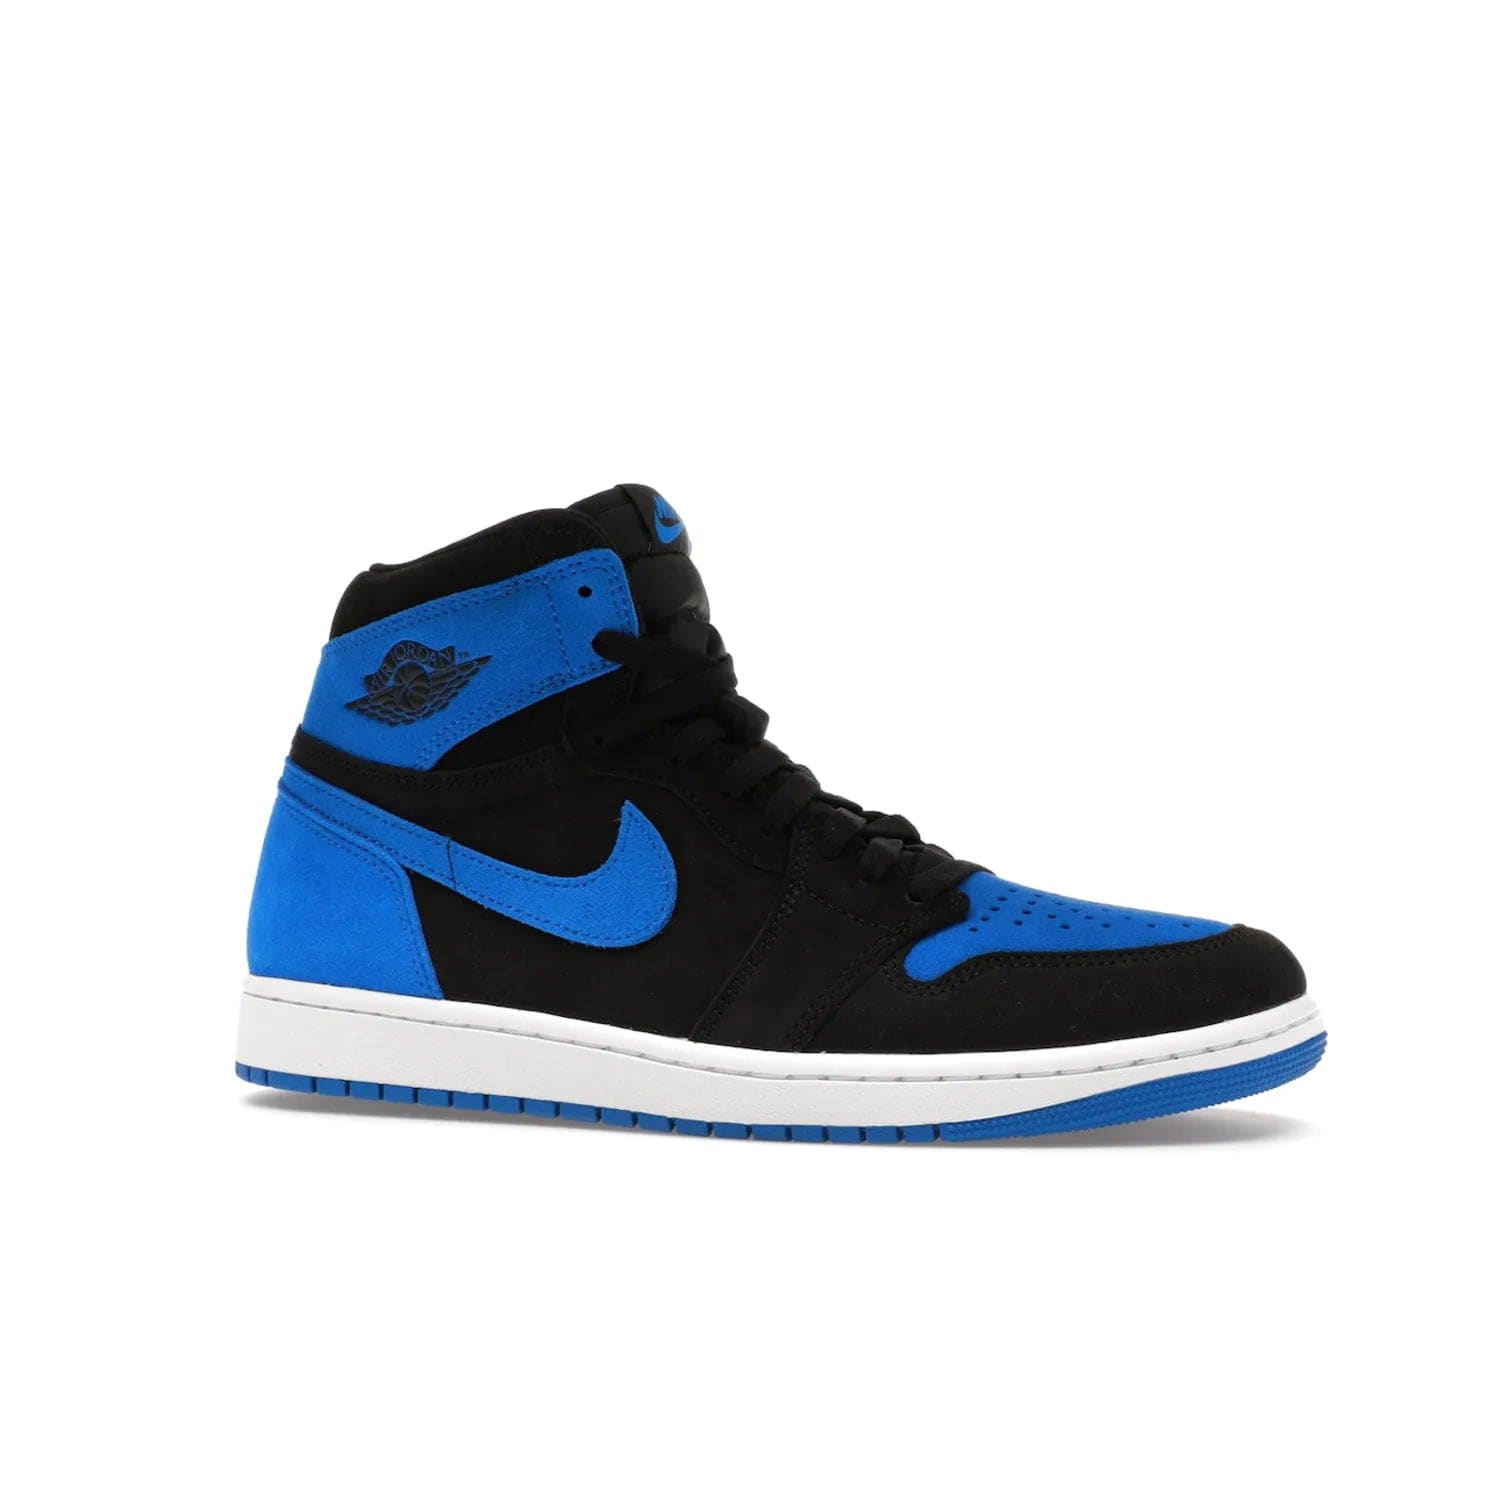 Jordan 1 Retro High OG Royal Reimagined - Image 3 - Only at www.BallersClubKickz.com - ####
Old meets the new: Jordan 1 Retro High OG 'Royal Reimagined' is a bold statement of evolution with its royal blue and black suede material makeup. Swoosh overlays, Wings logos, padded ankle collars and Nike Air tags maintain the OG's legendary lineage. Get a pair on November 4th and be part of a fearless, unyielding story.